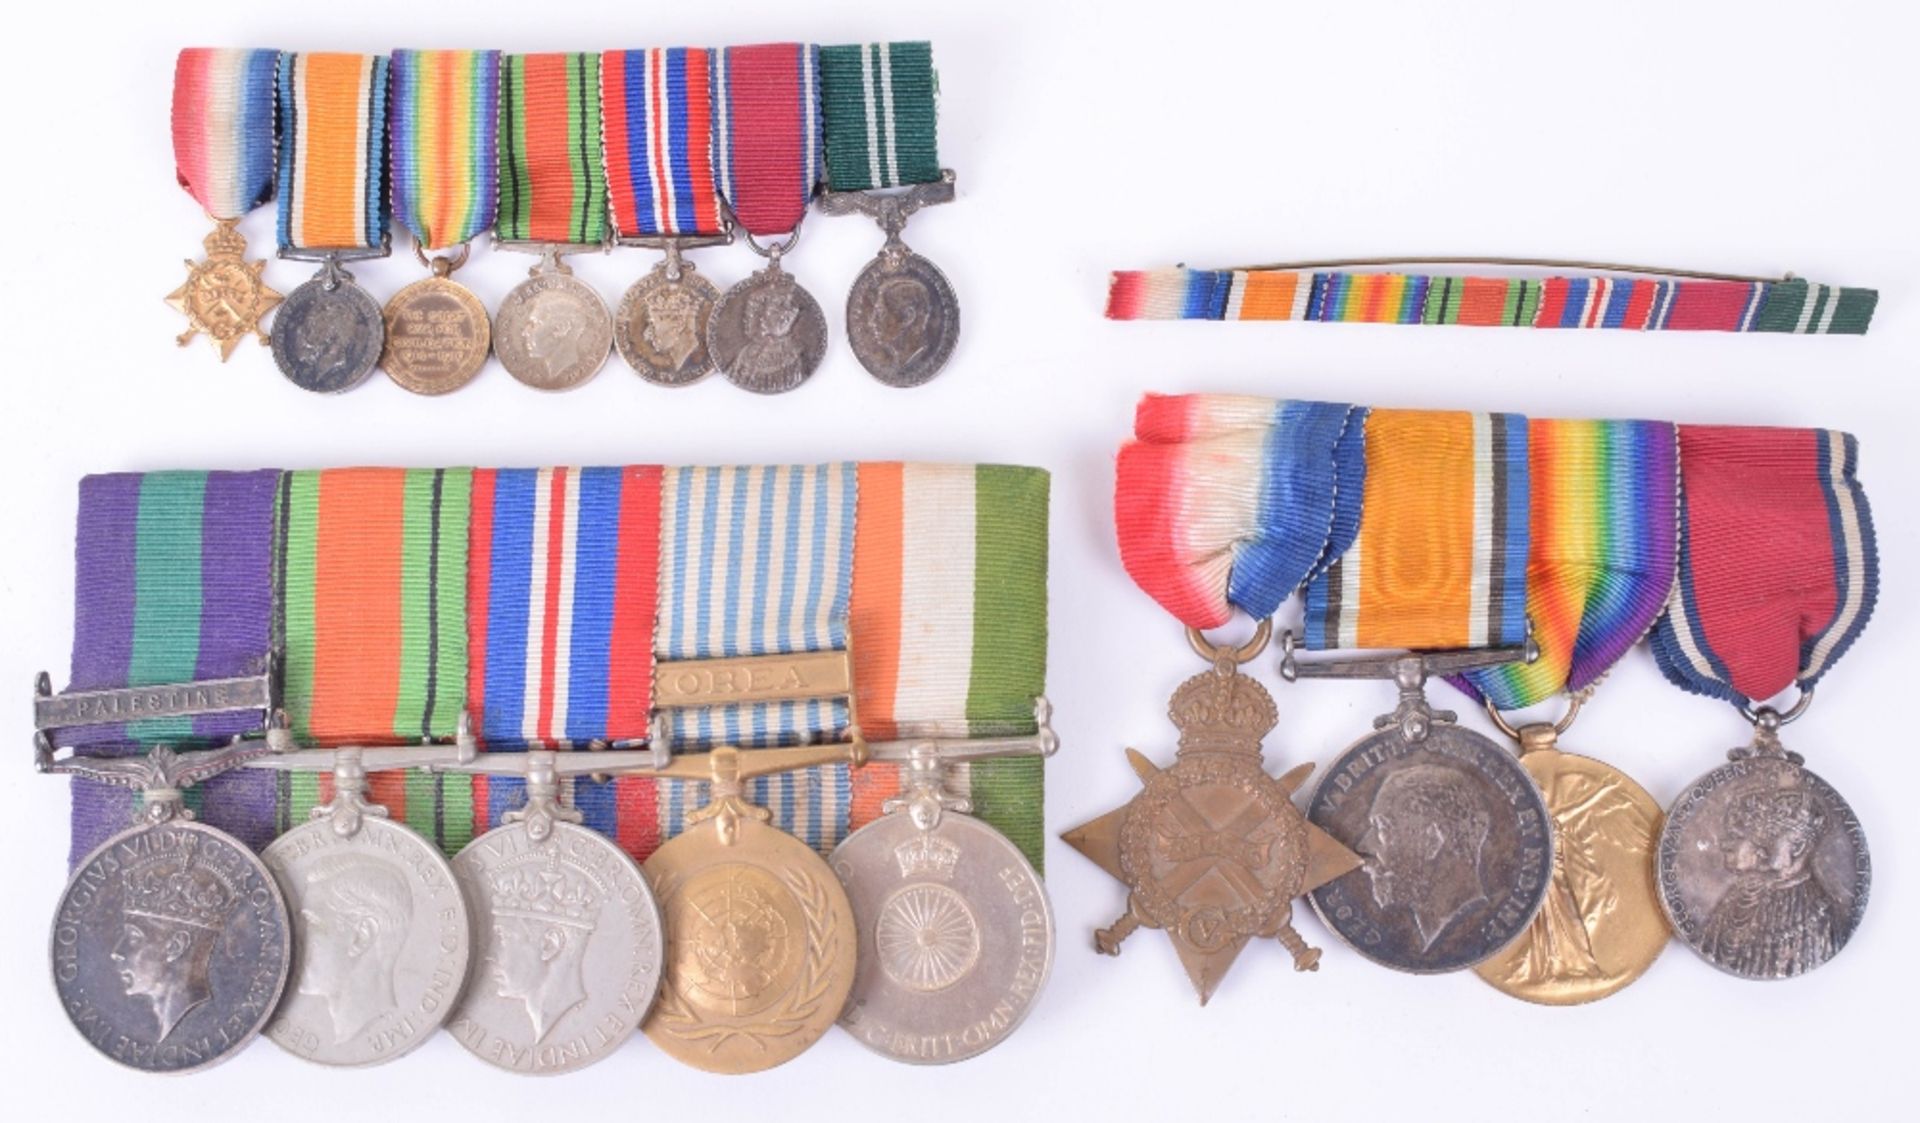 Father and Son Medal Groups of the Cole Family, Royal Navy and Manchester Regiment